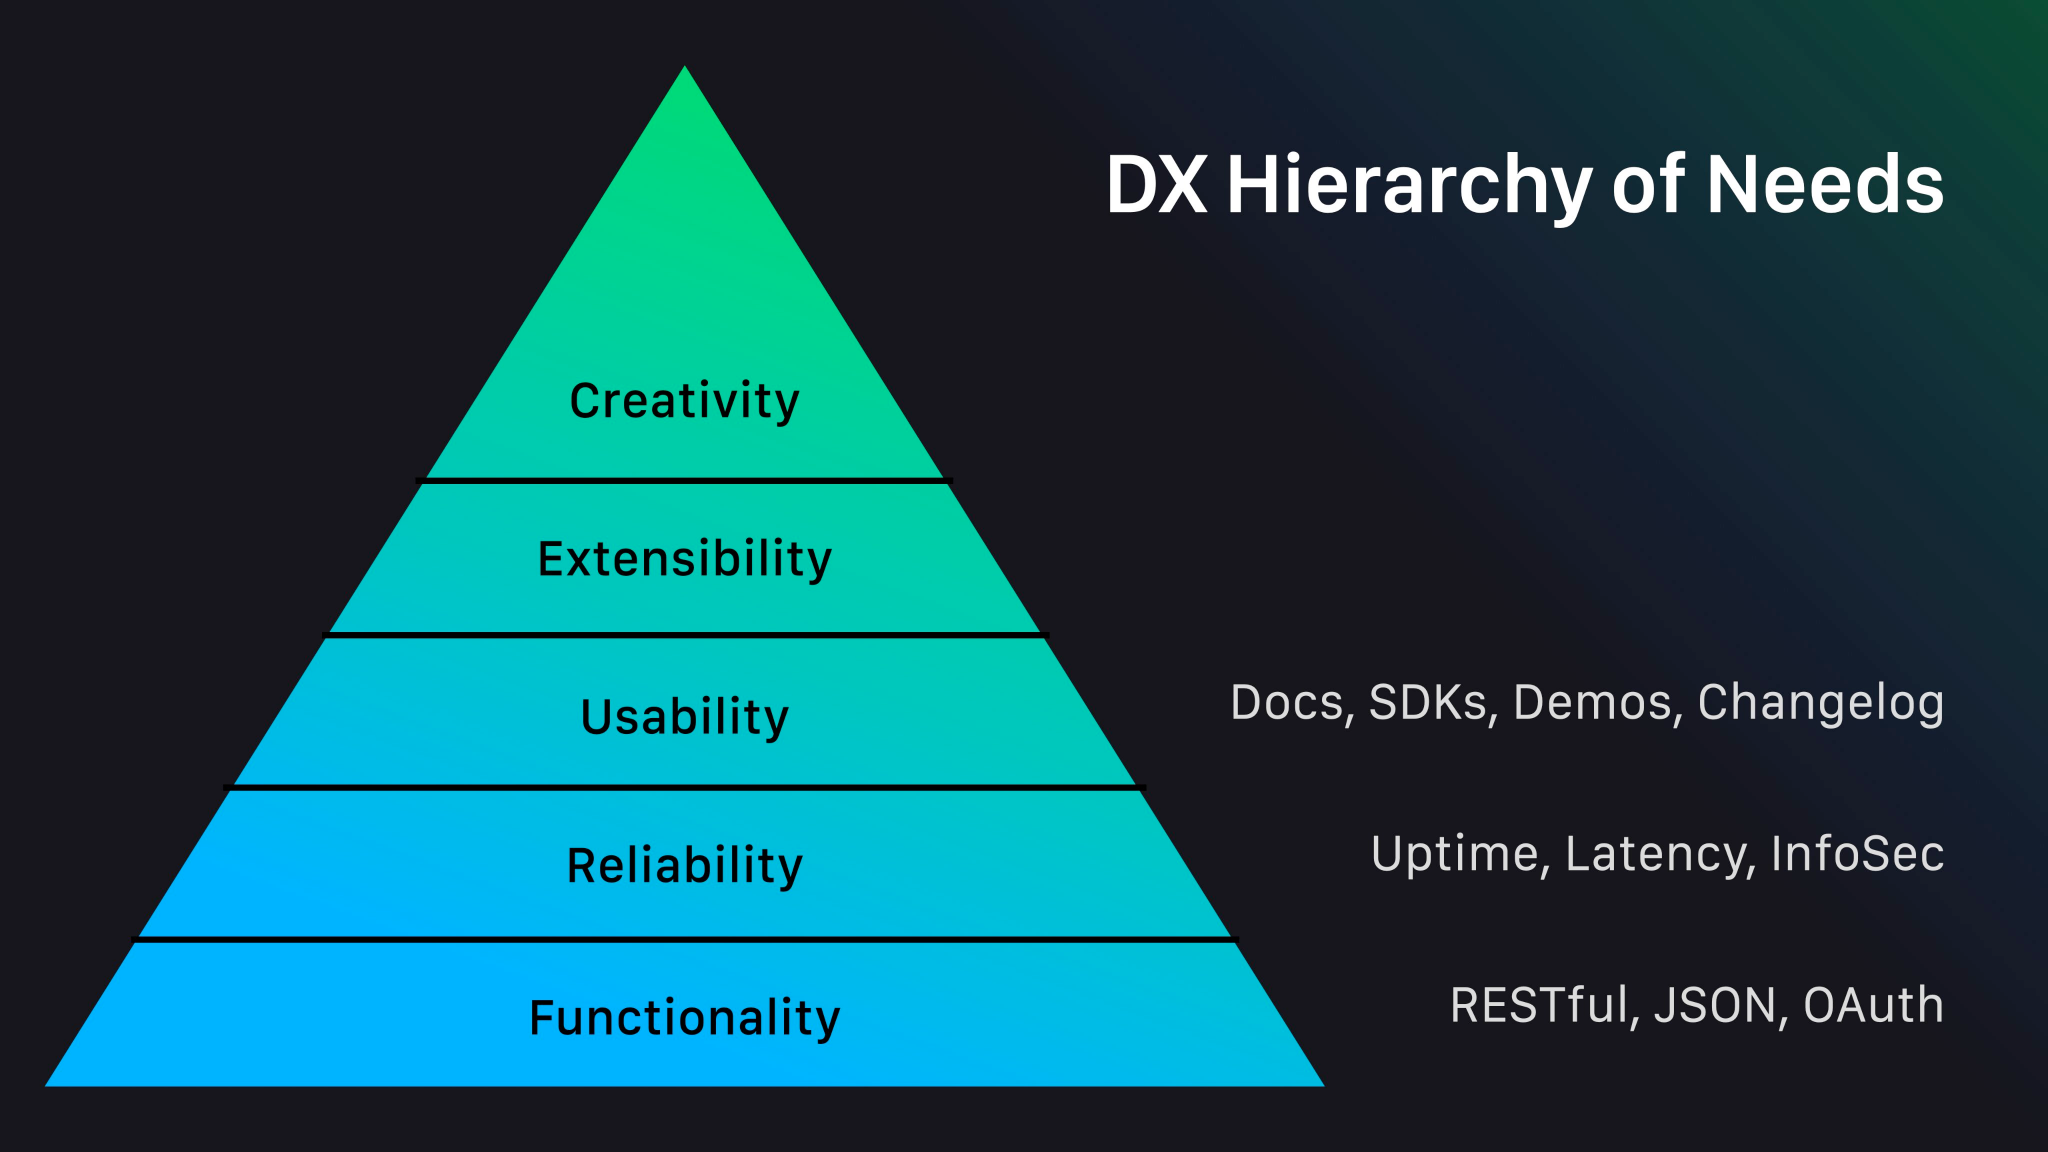 The Developer Experience Hierarchy of Needs